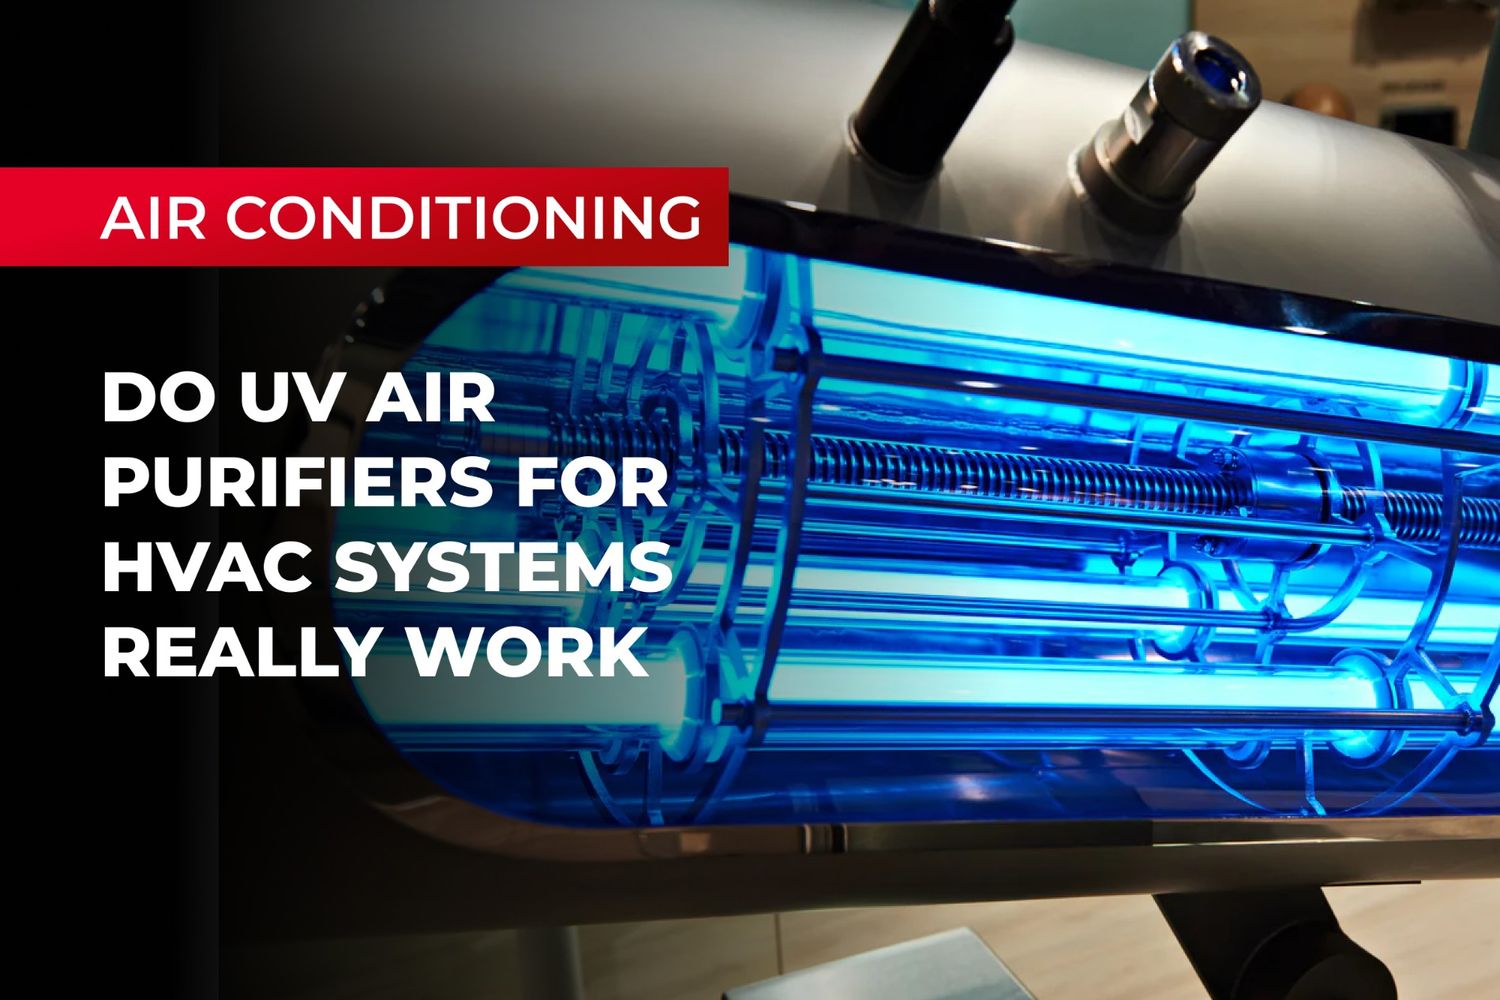 Do UV Air Purifiers For HVAC Systems Really Work?